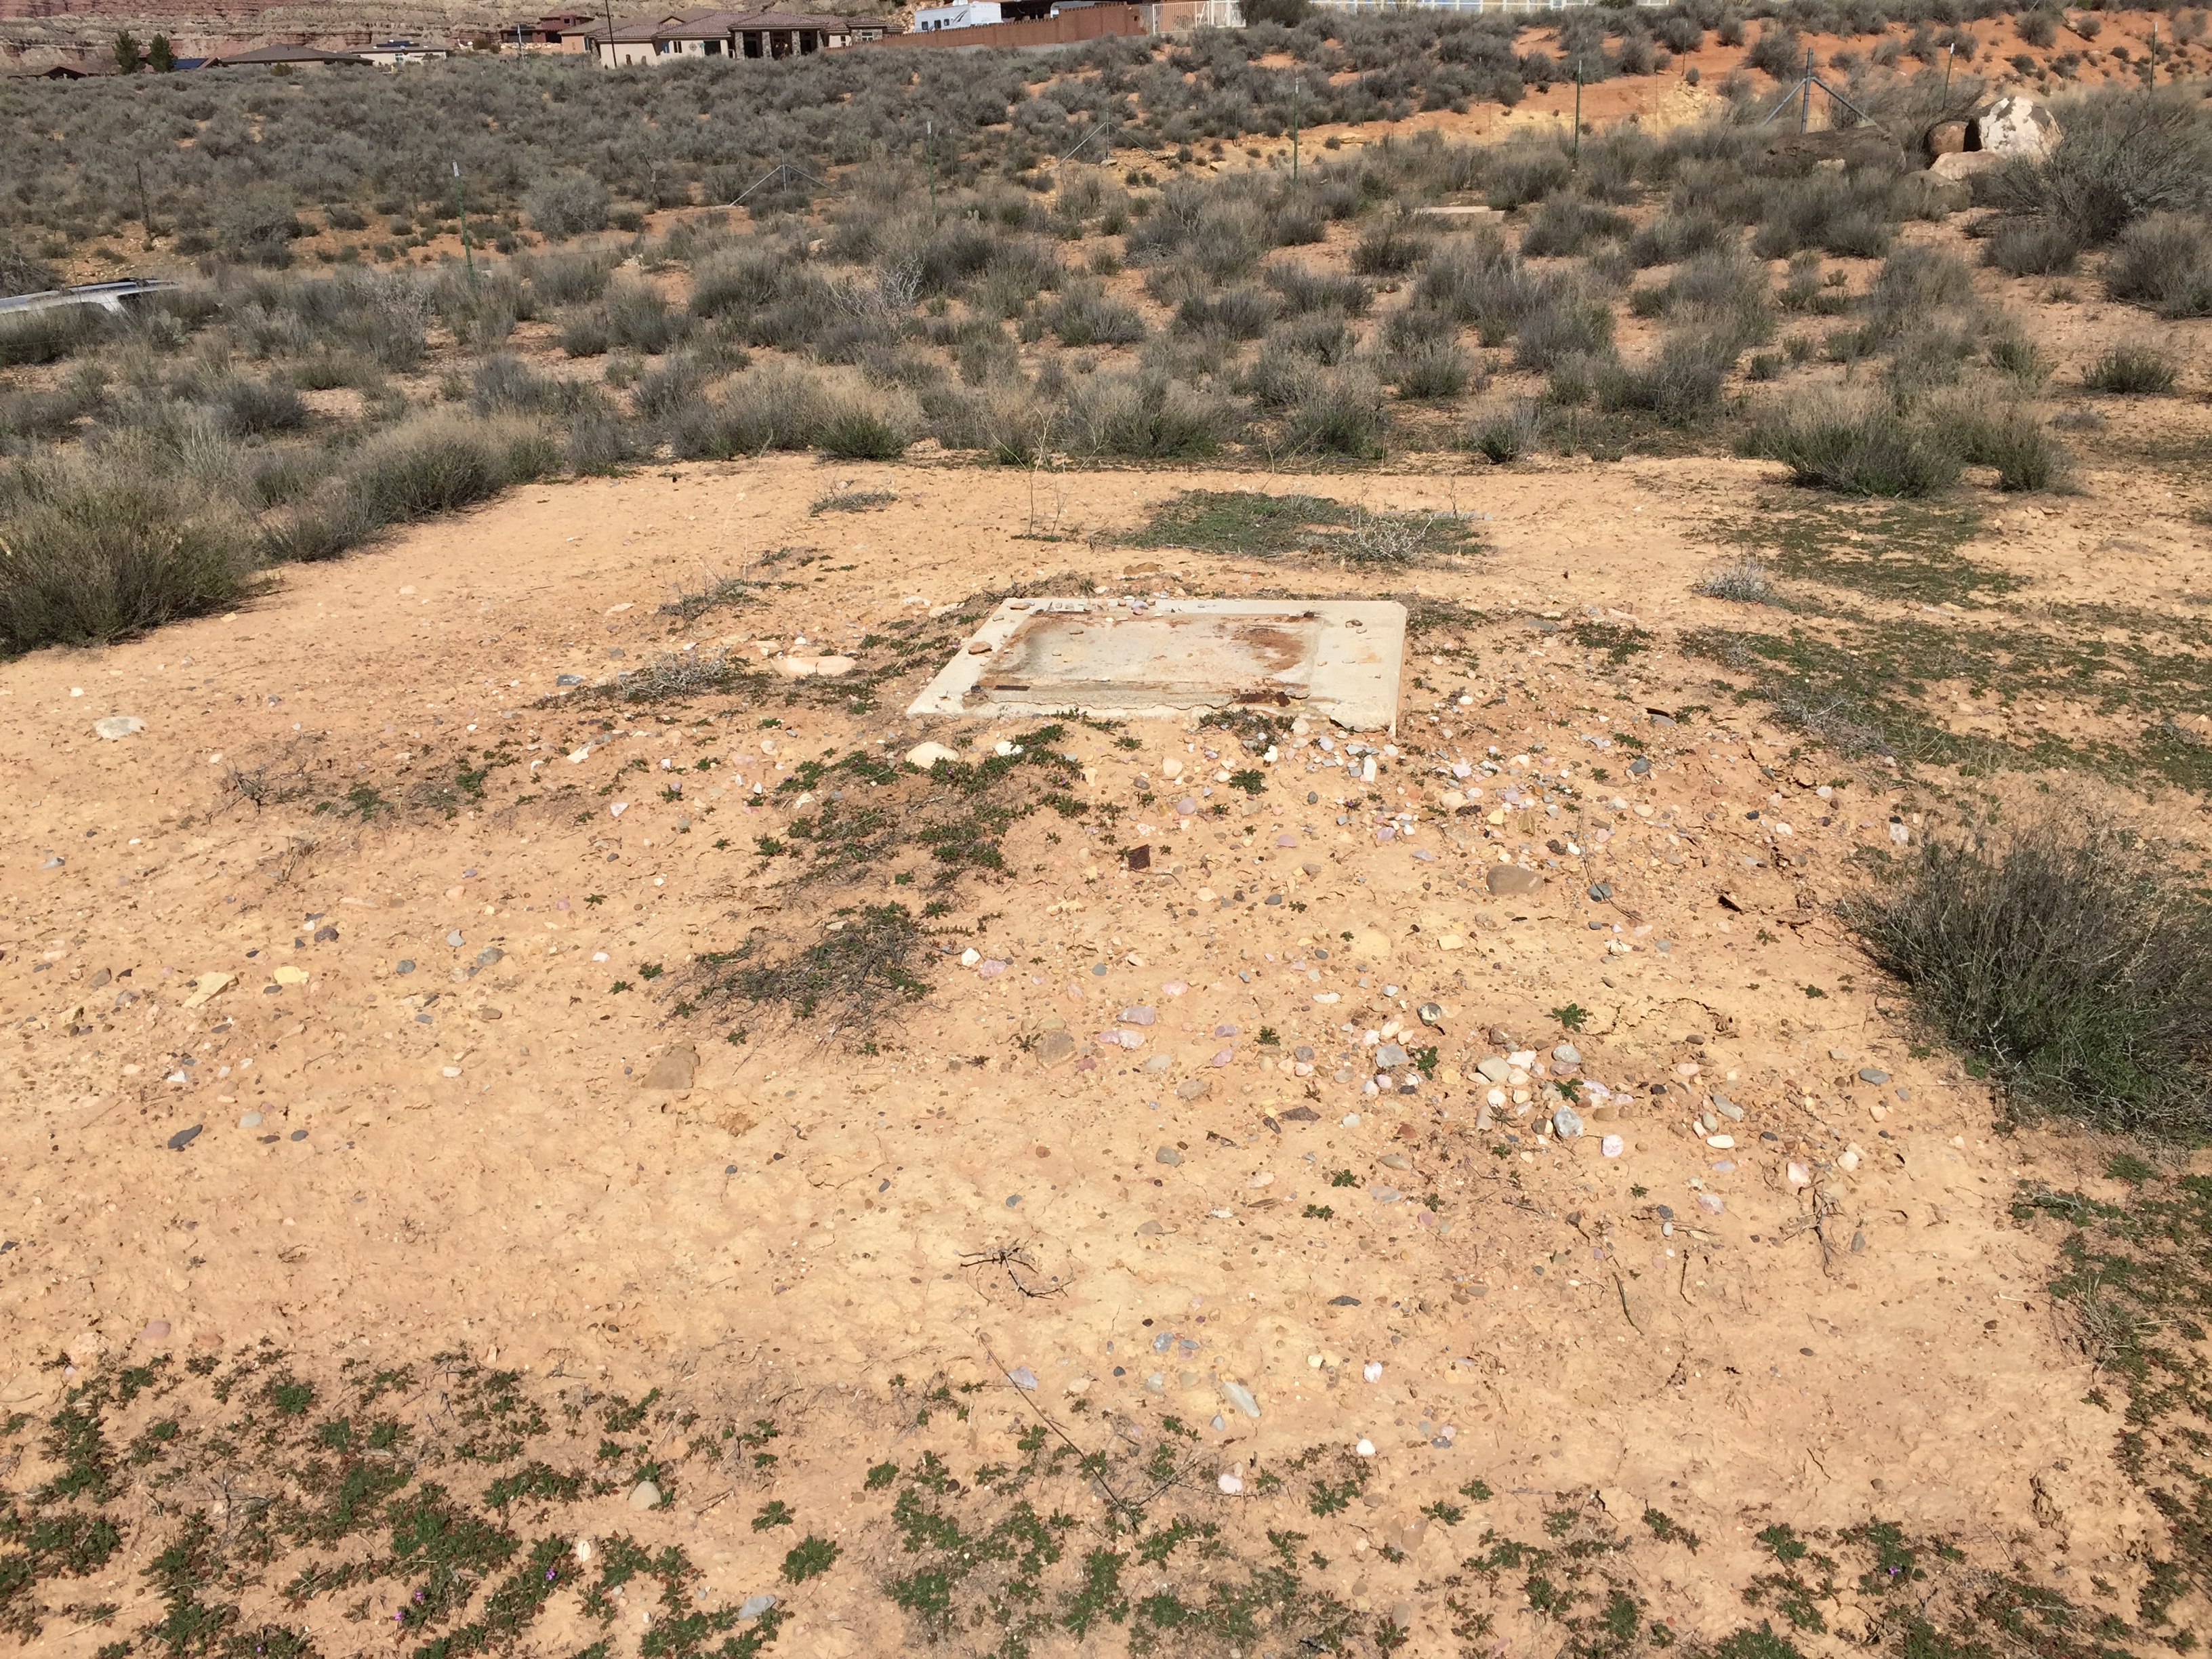 An area where an unidentified structure once stood